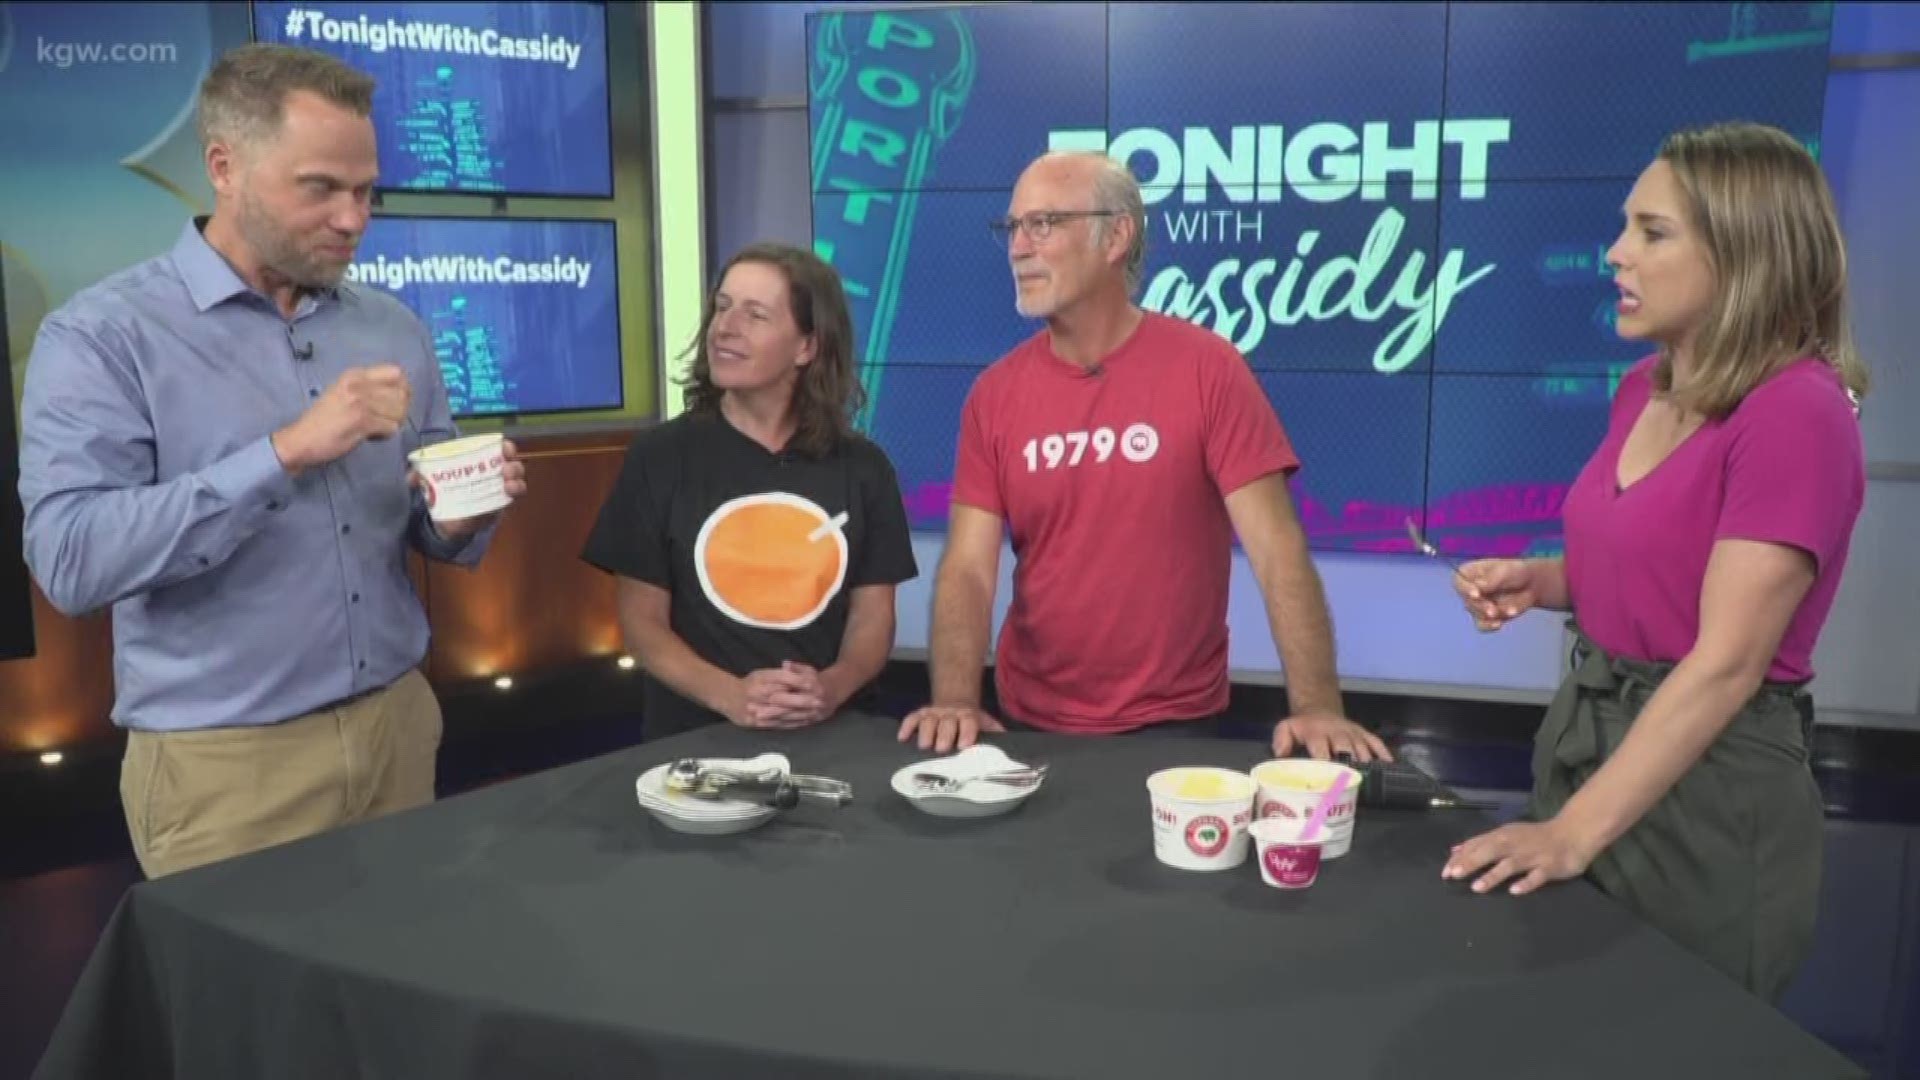 Elephant's Deli is celebrating its 40th anniversary with a Ruby Jewel collaboration. They've turned with Tomato Orange soup into ice cream.

#TonightwithCassidy